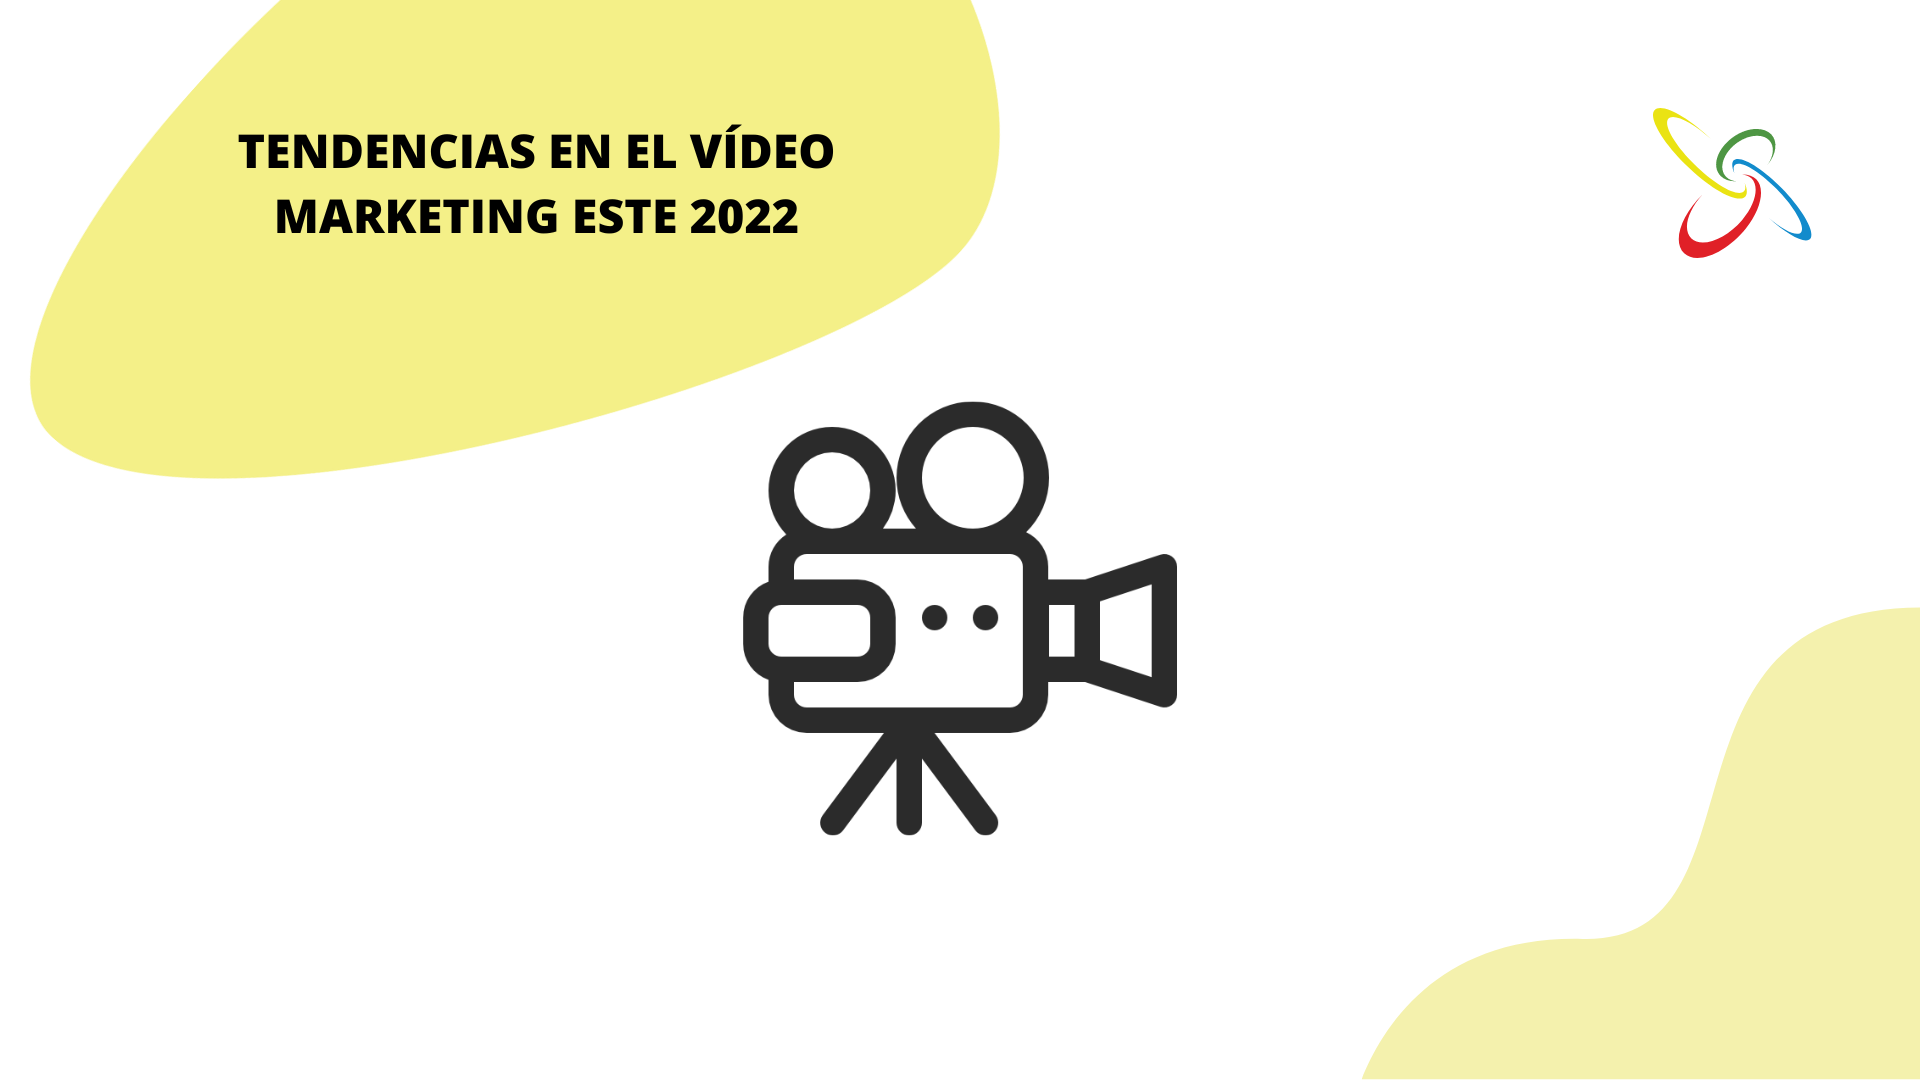 Trends in video marketing this 2022